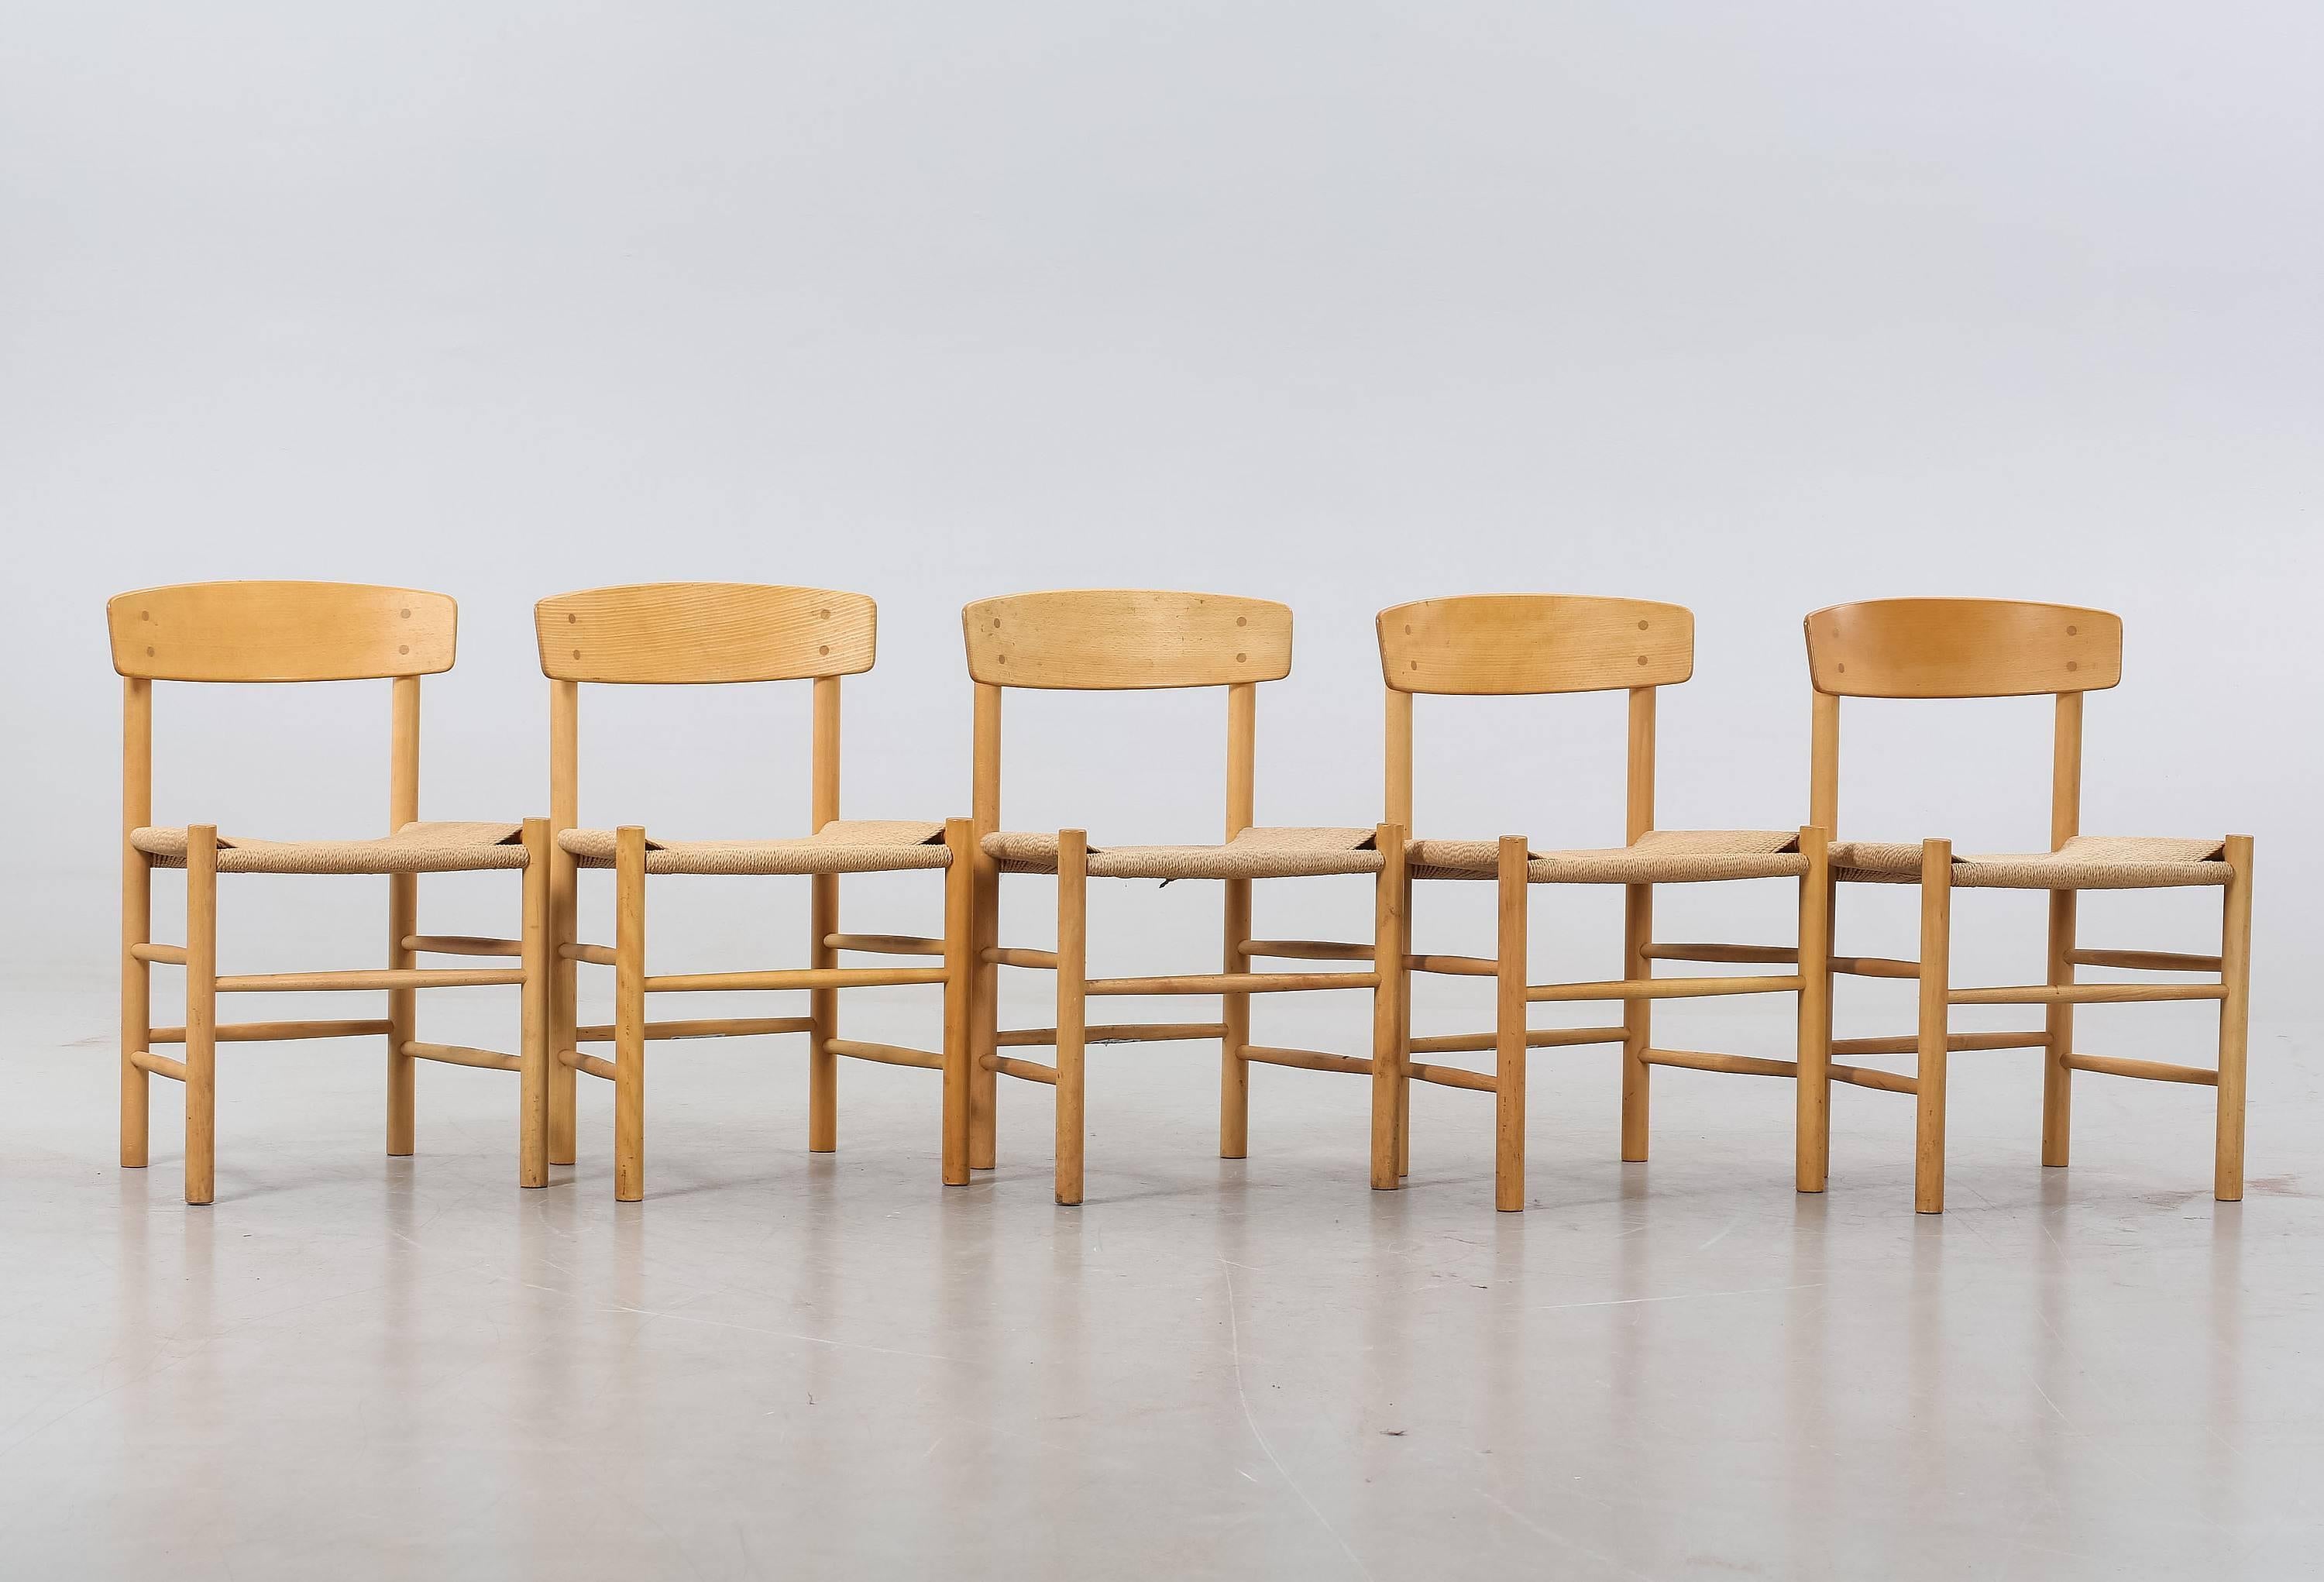 Set of Børge Mogensen dining chairs made in oak, beech and paper cord.